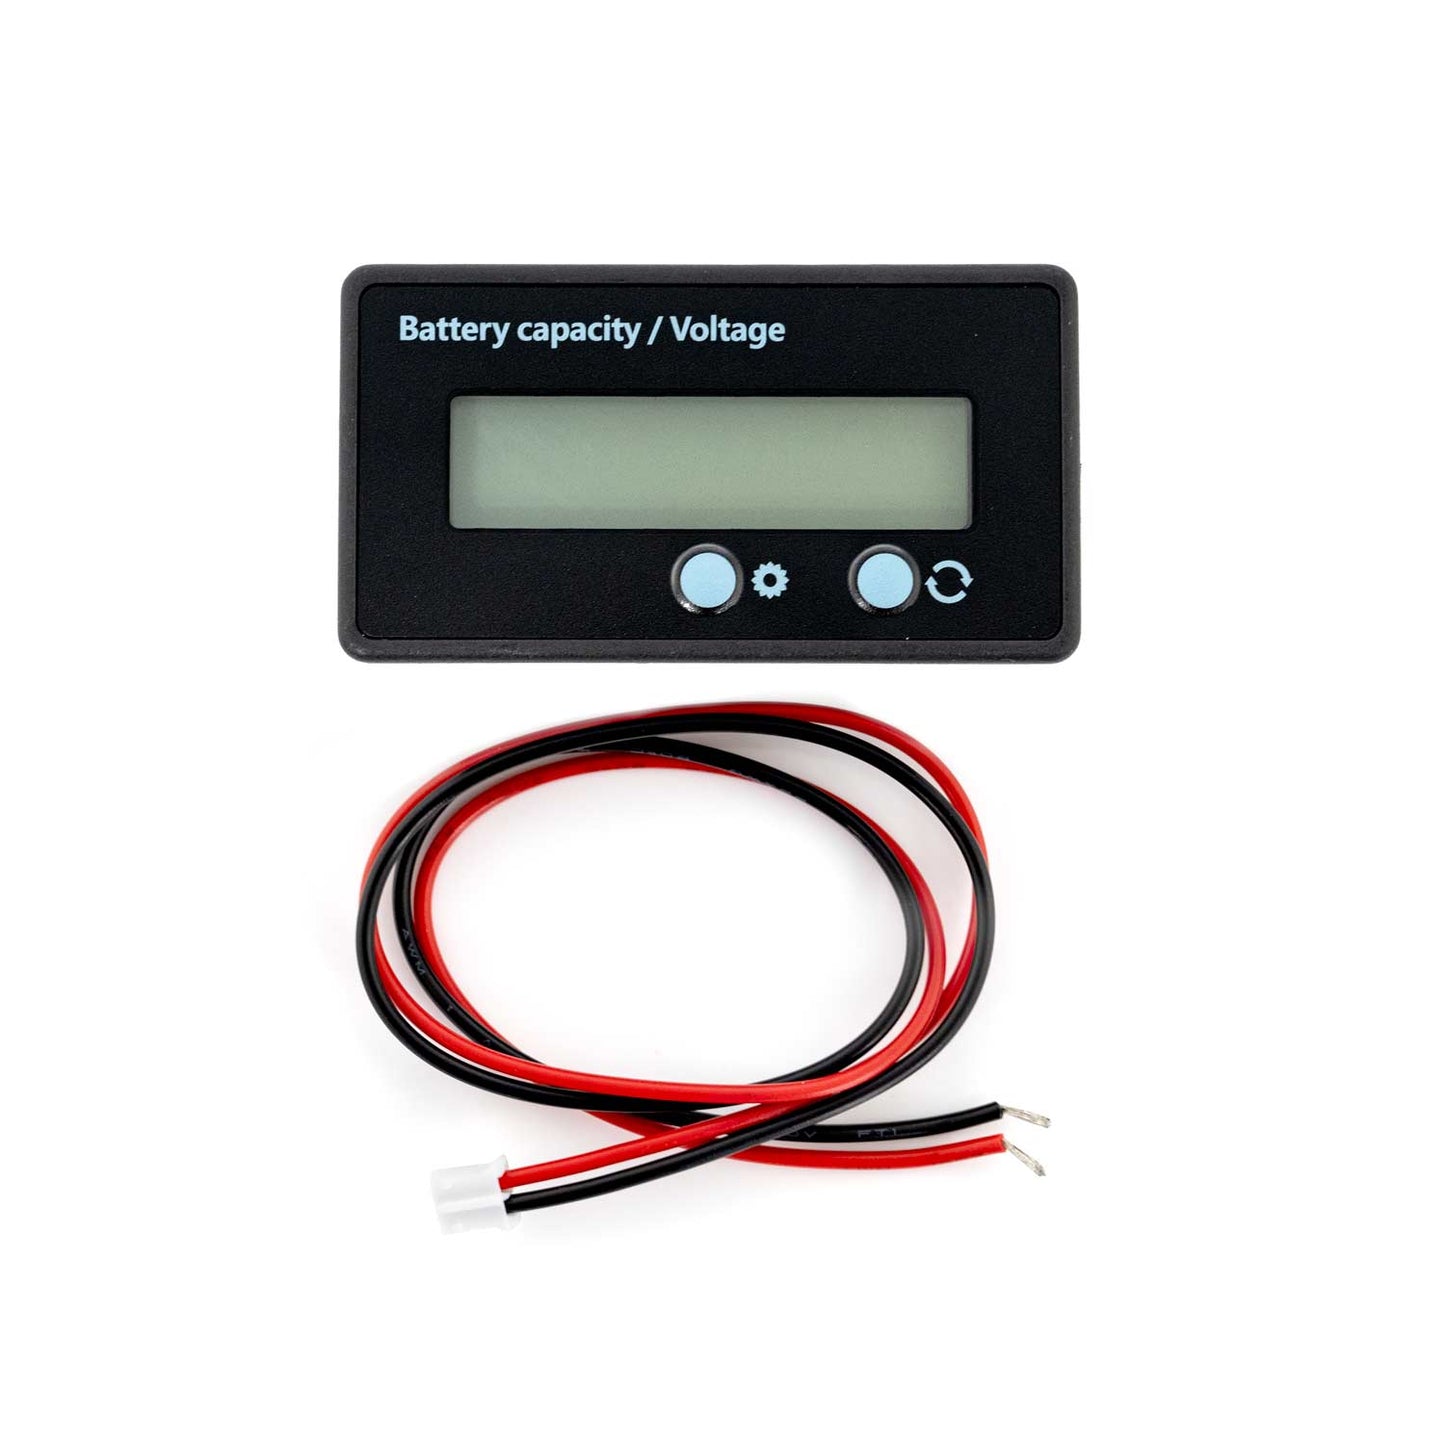 Battery Capacity and Voltage Meter